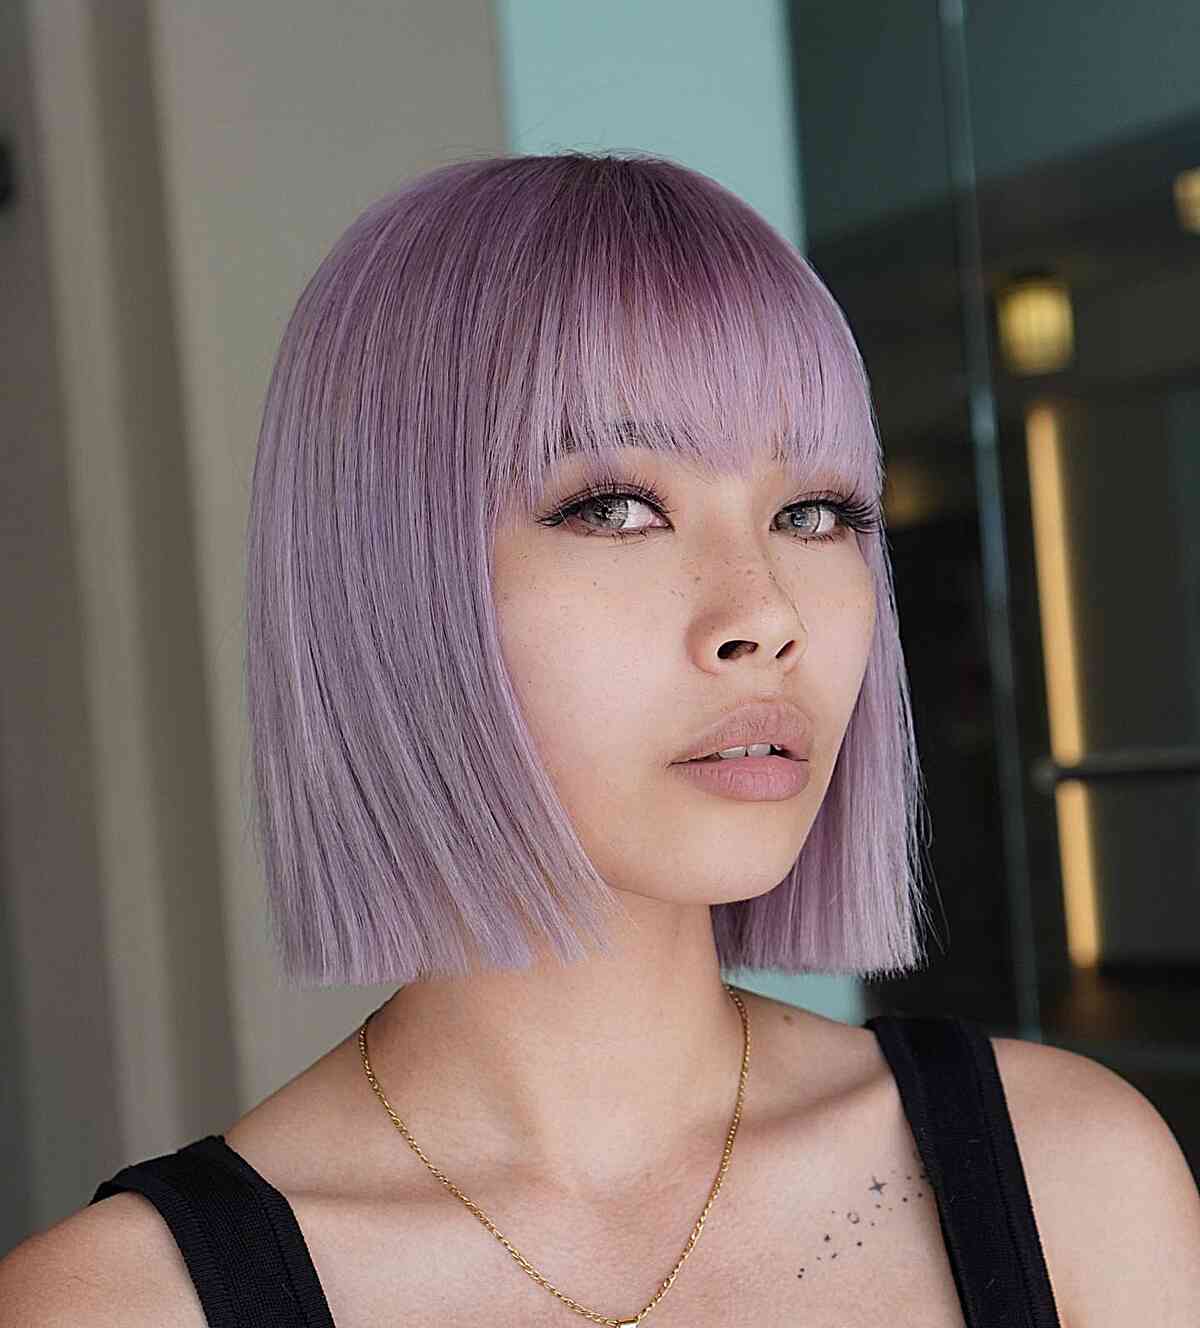 Chocolate Lilac Hair Color: Transform Your Look with this Deliciously ...